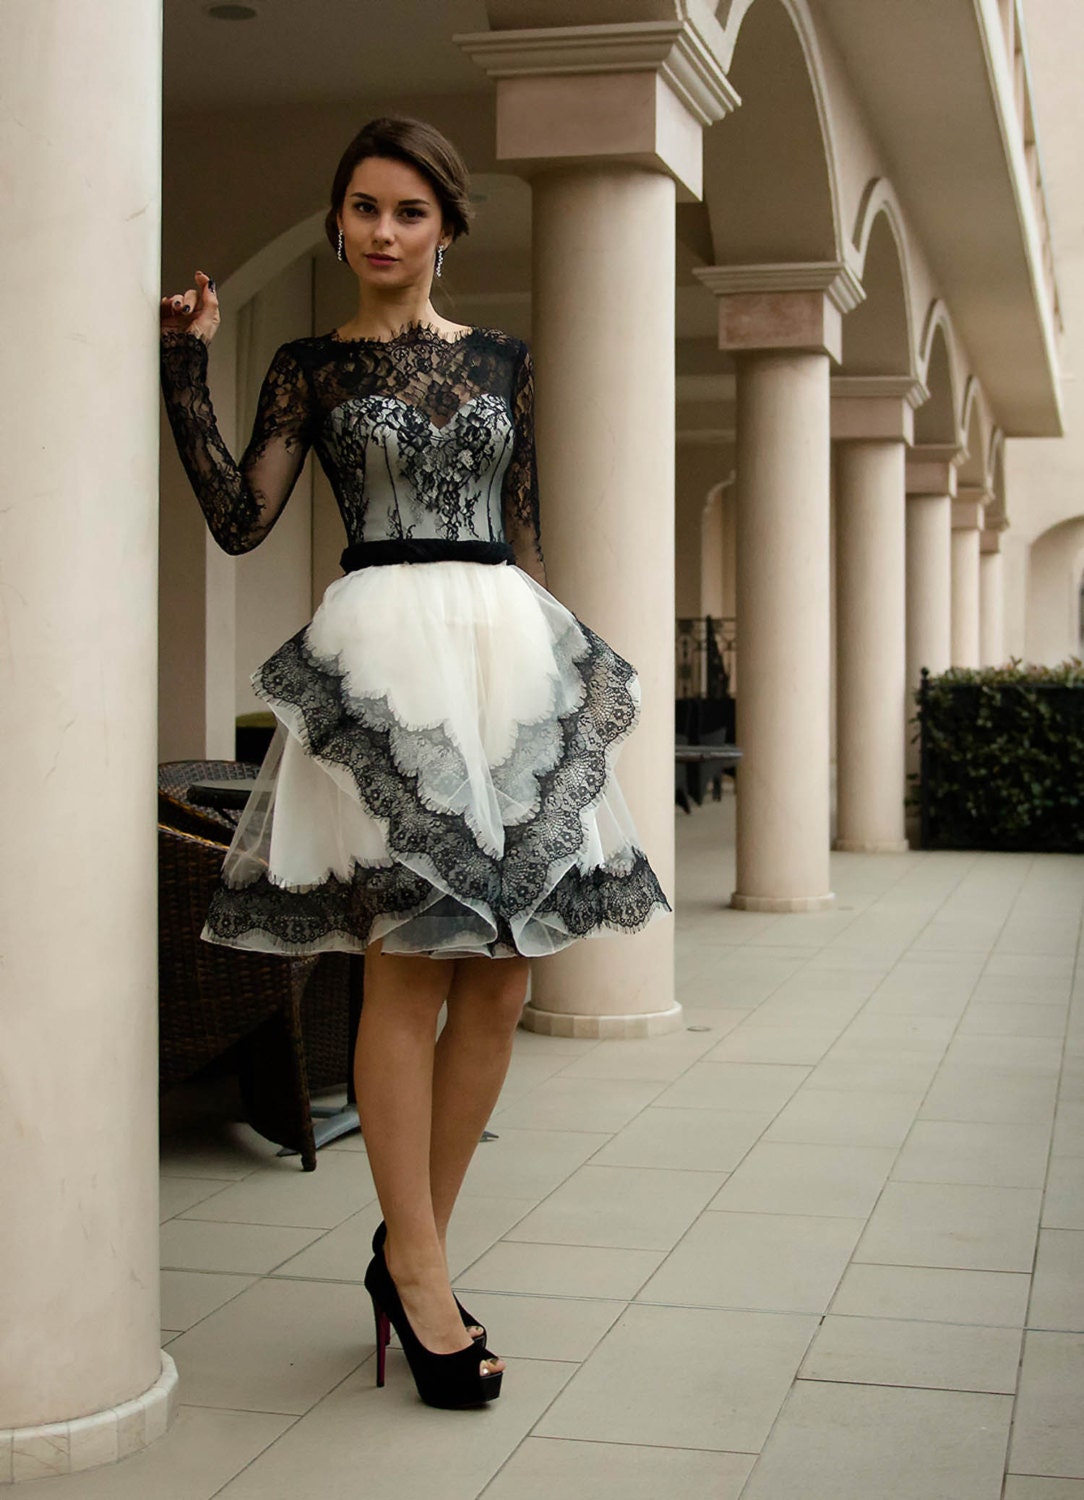 Black and white wedding dress Short bridal dress with lace